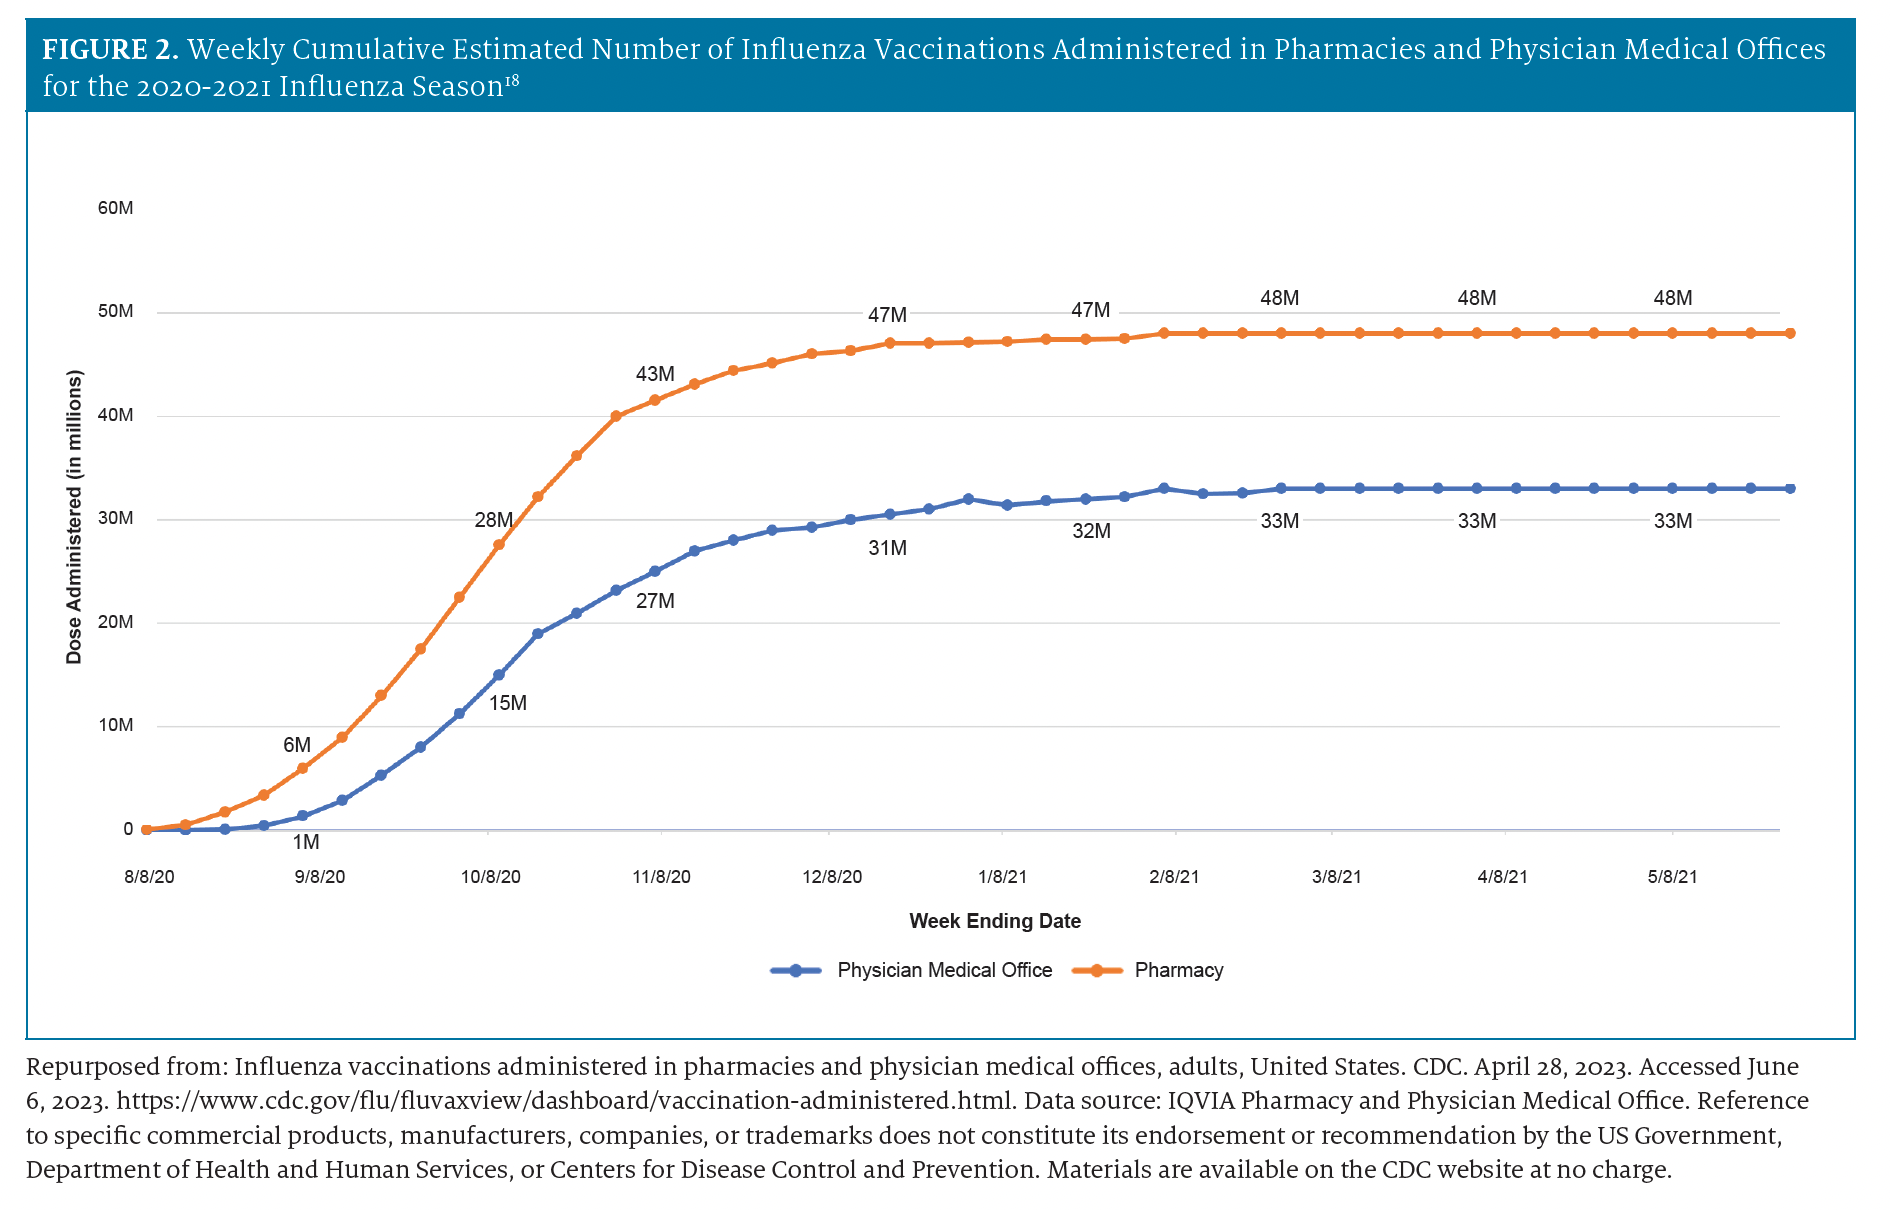 Weekly Cumulative Estimated Number of Influenza Vaccinations Administered in Pharmacies and Physician Medical Offices for the 2020-2021 Influenza Season